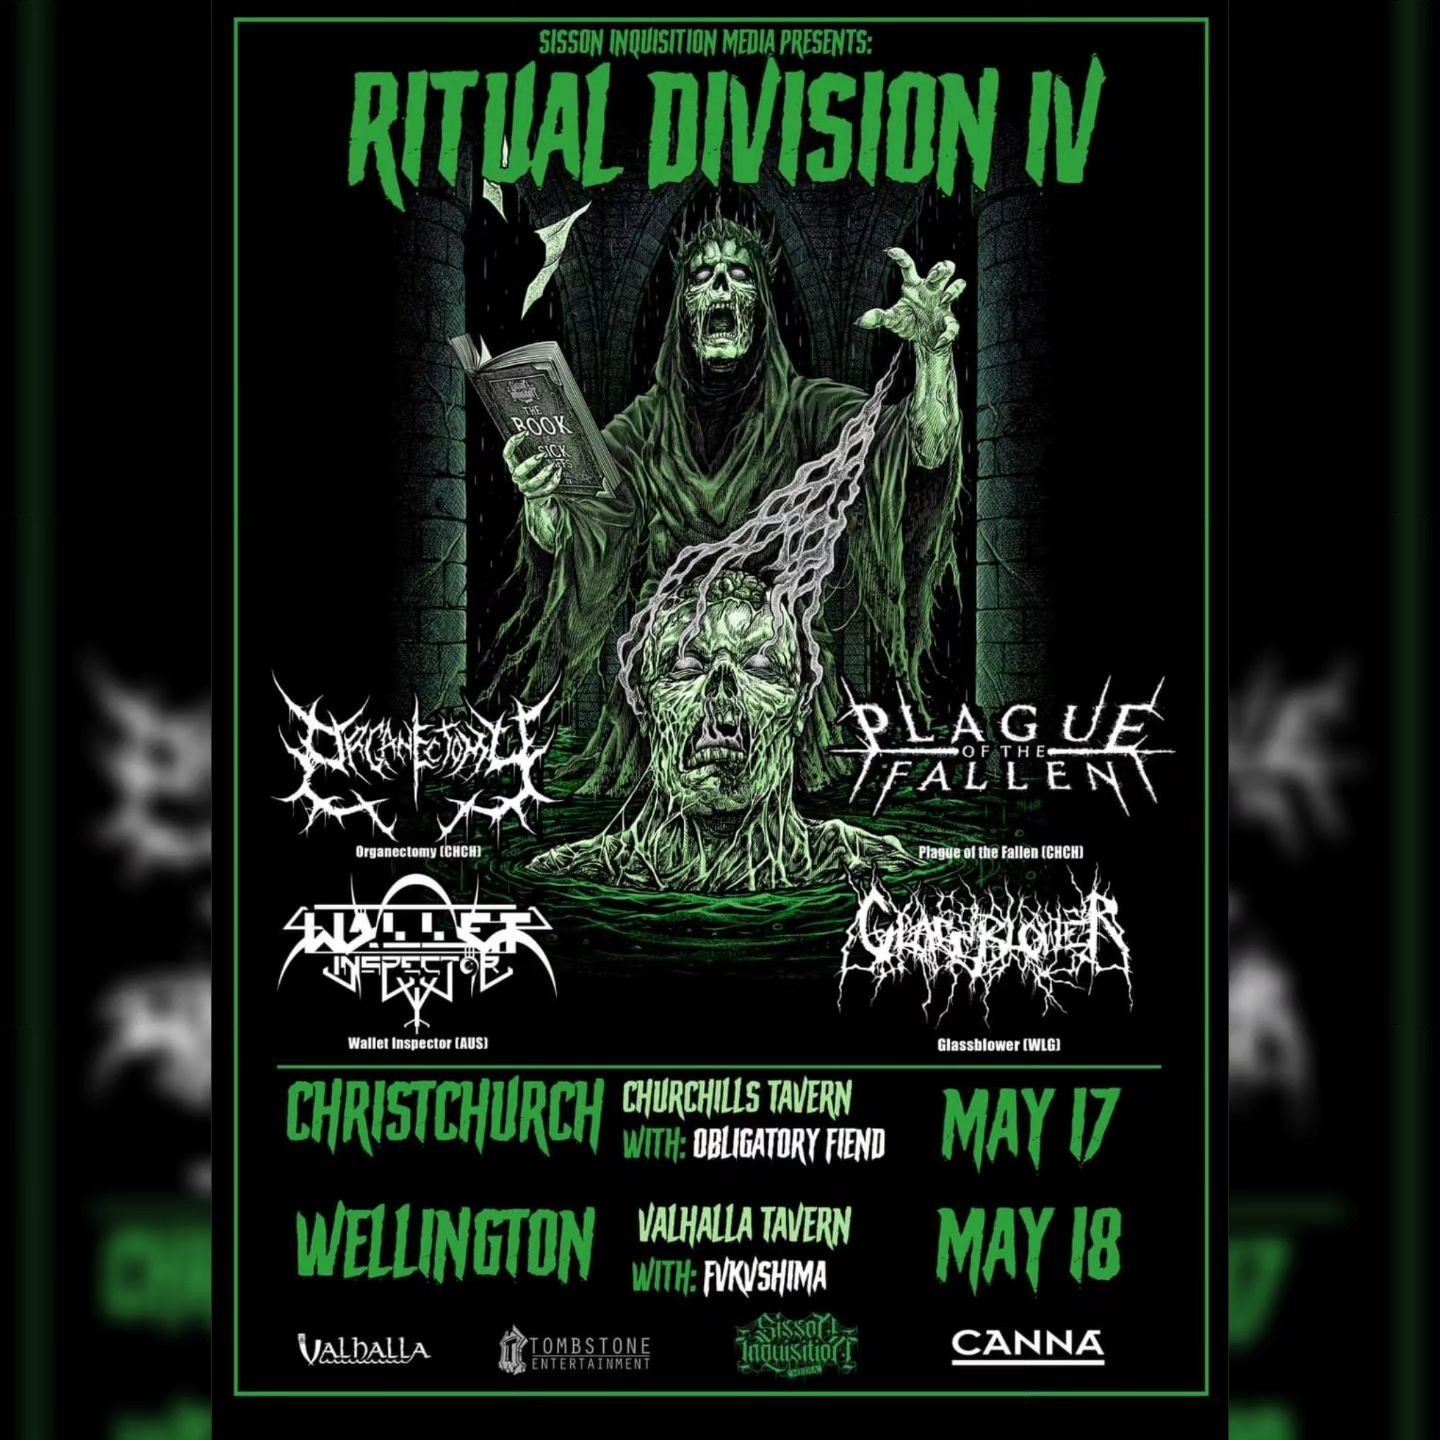 1 week to go til Ritual Division IV!
We haven't seen you in a while Christchurch and Wellington, we can't wait to throw down with you! 
5 crushing bands joining us
@plagueofthefallen 
@glassblowerhardcore 
@walletinspectorband 
@obligatory_fiend 
@fv